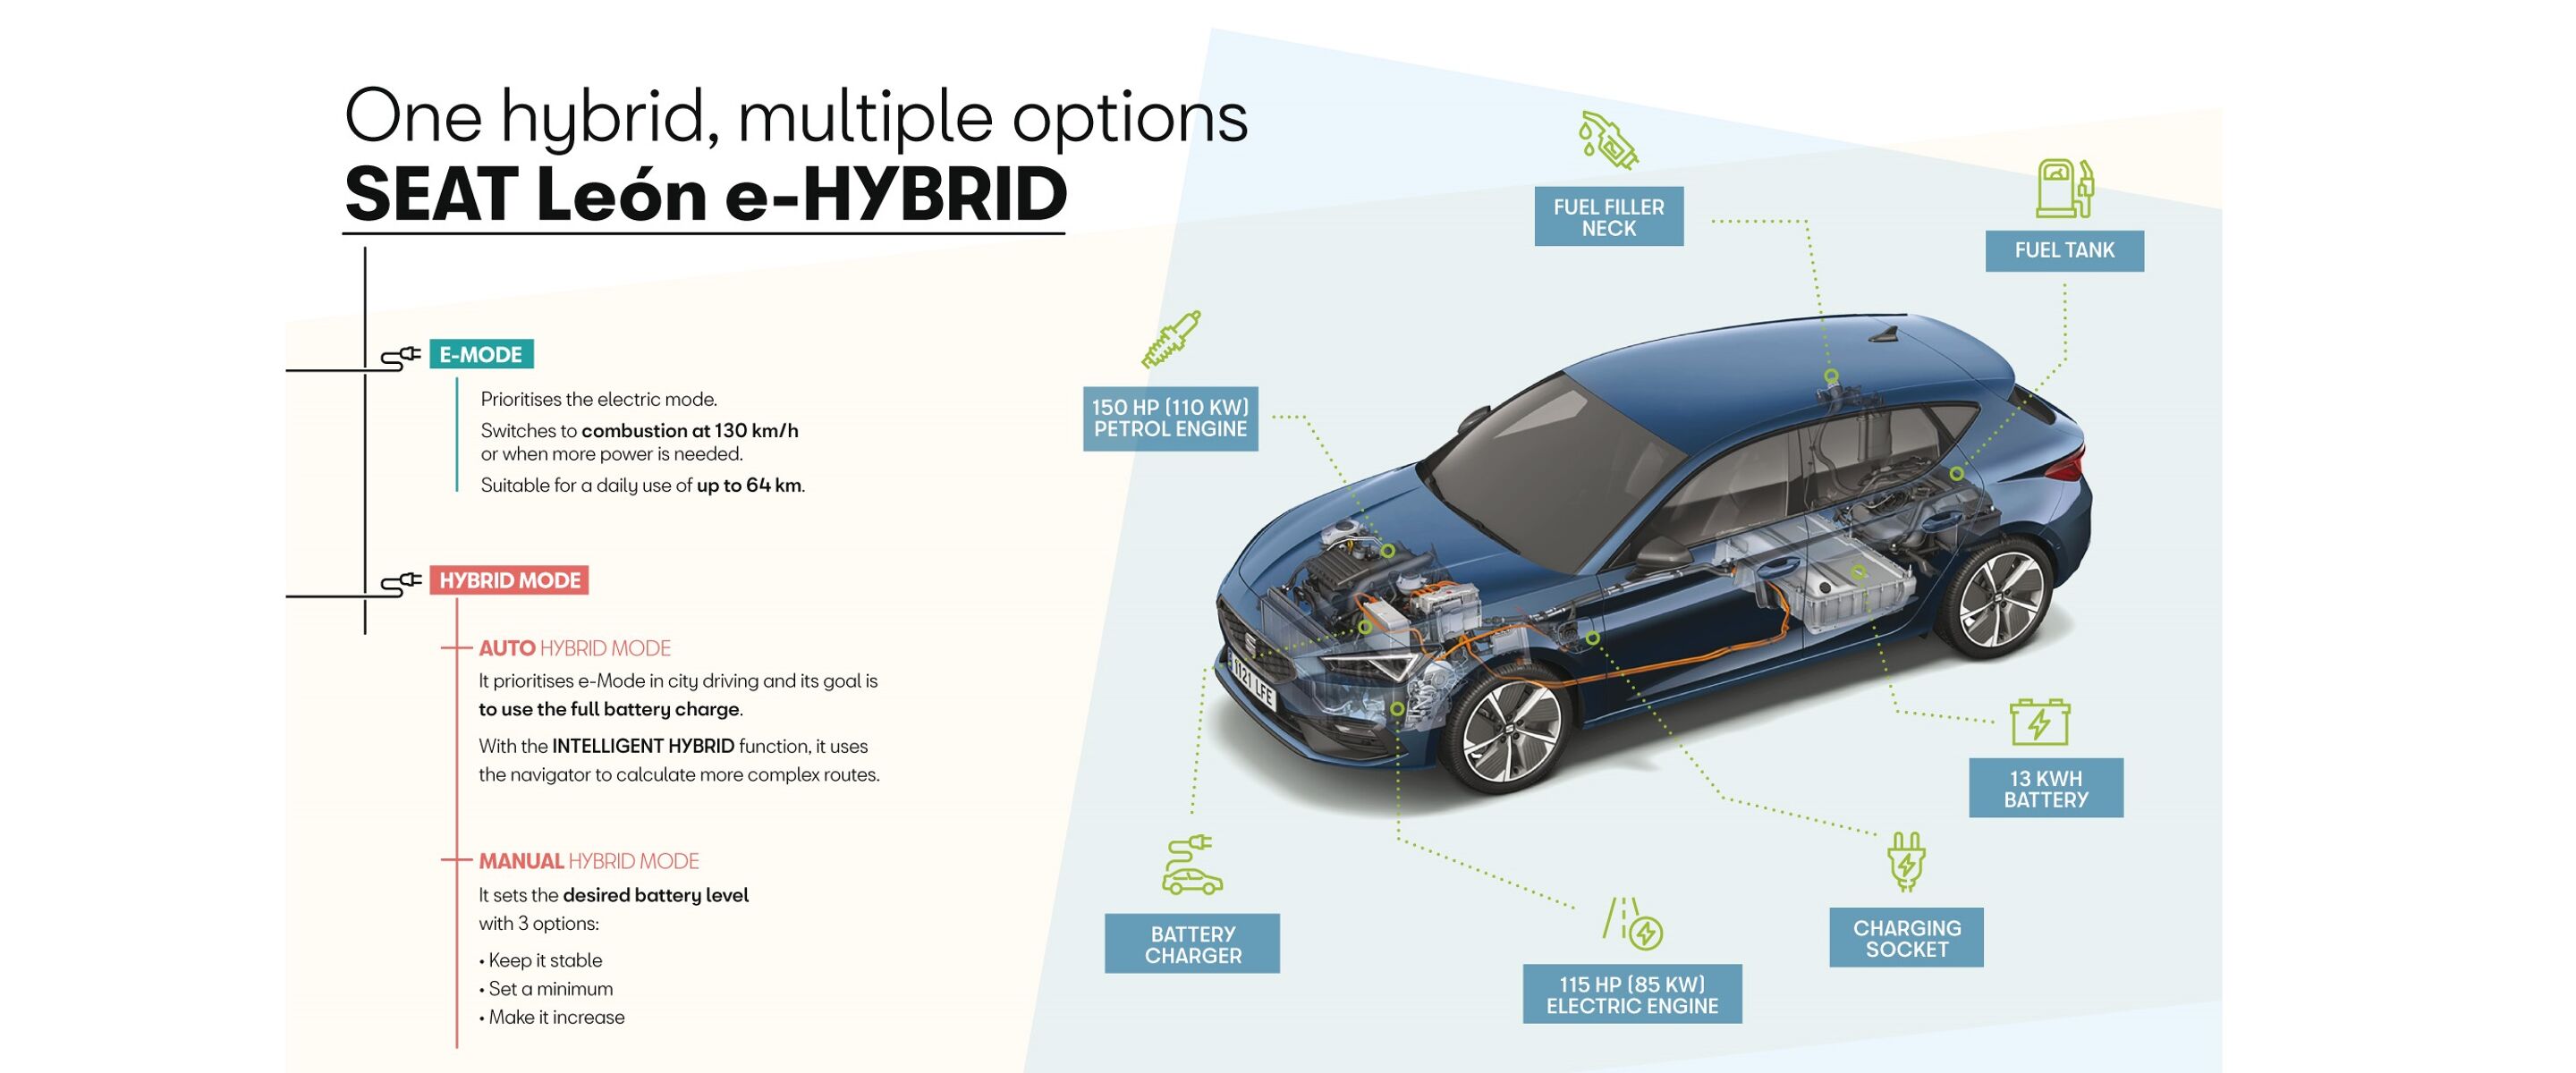 a-hybrid-for-every-occasion-04-hq - kopie